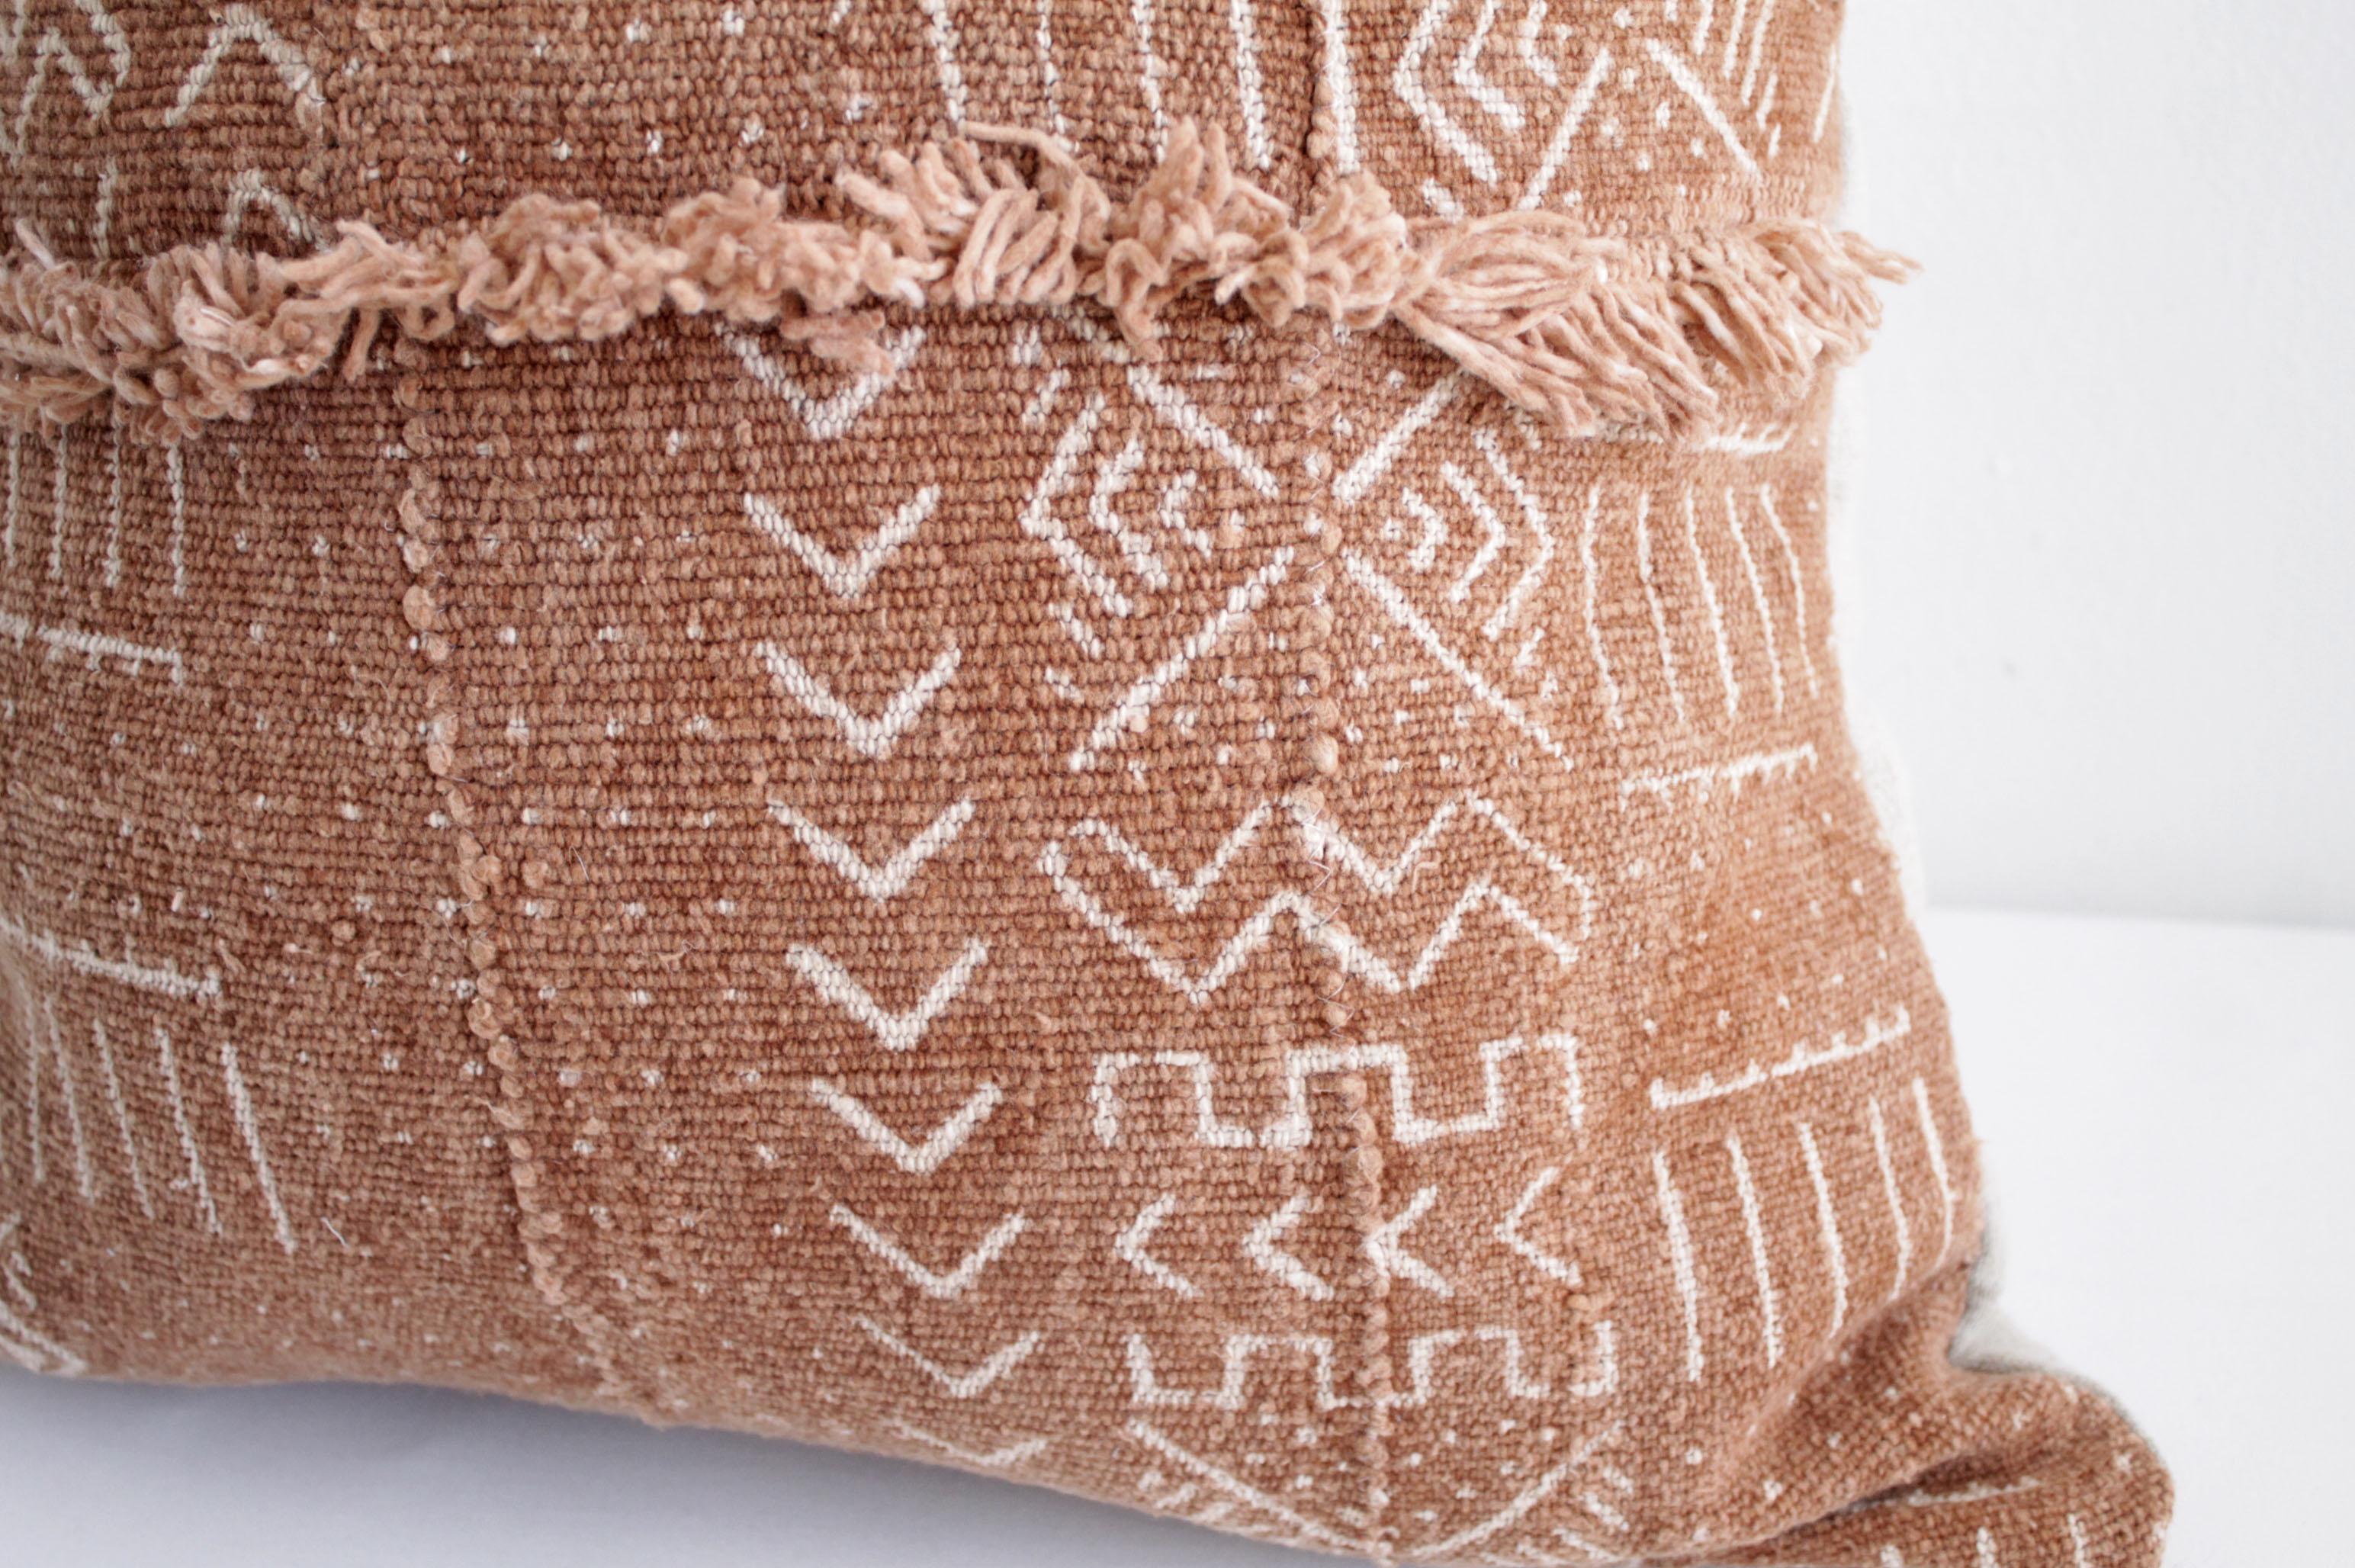 Contemporary Vintage African Mali Mud Cloth Pillow with Original Details